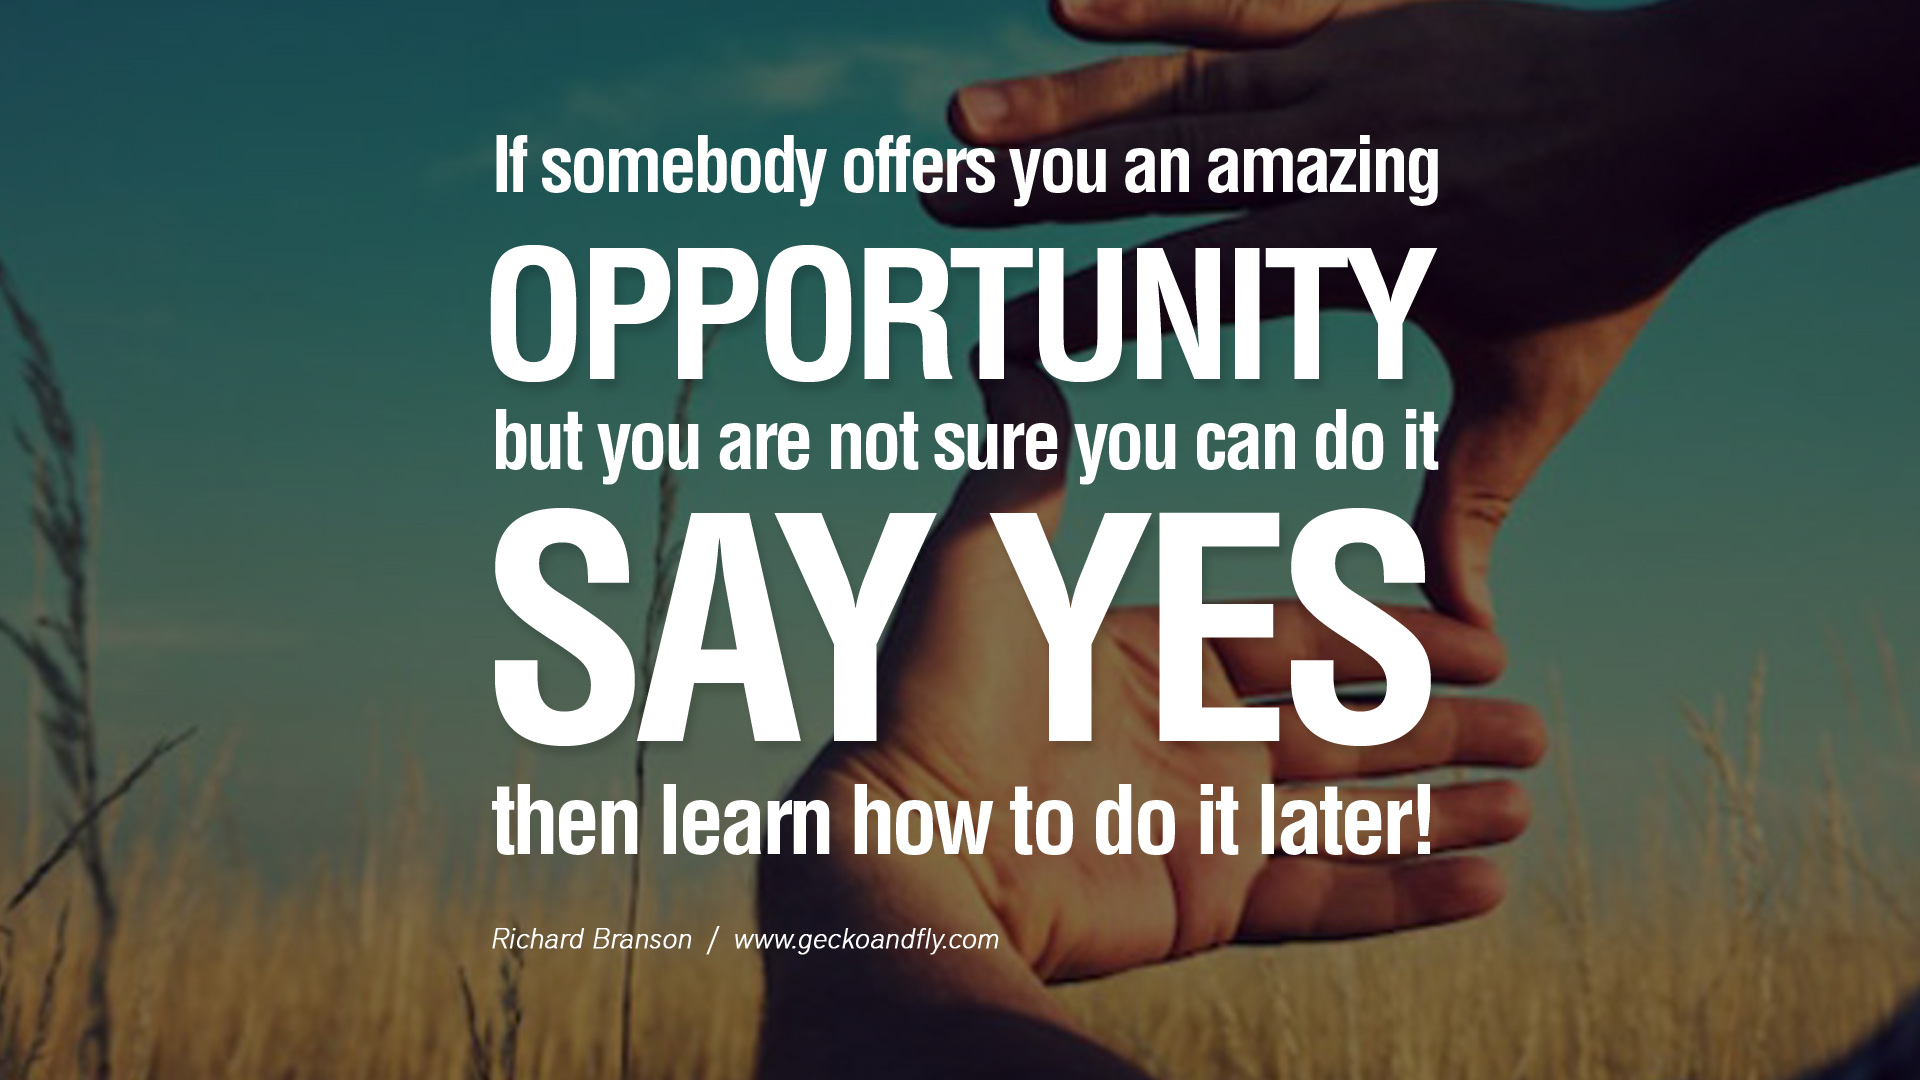 if-somebody-offers-you-an-amazing-opportunity-but-you-are-not-sure-you-can-do-it-say-yes-then-learn-how-to-do-it-later-opportunity-quote-1